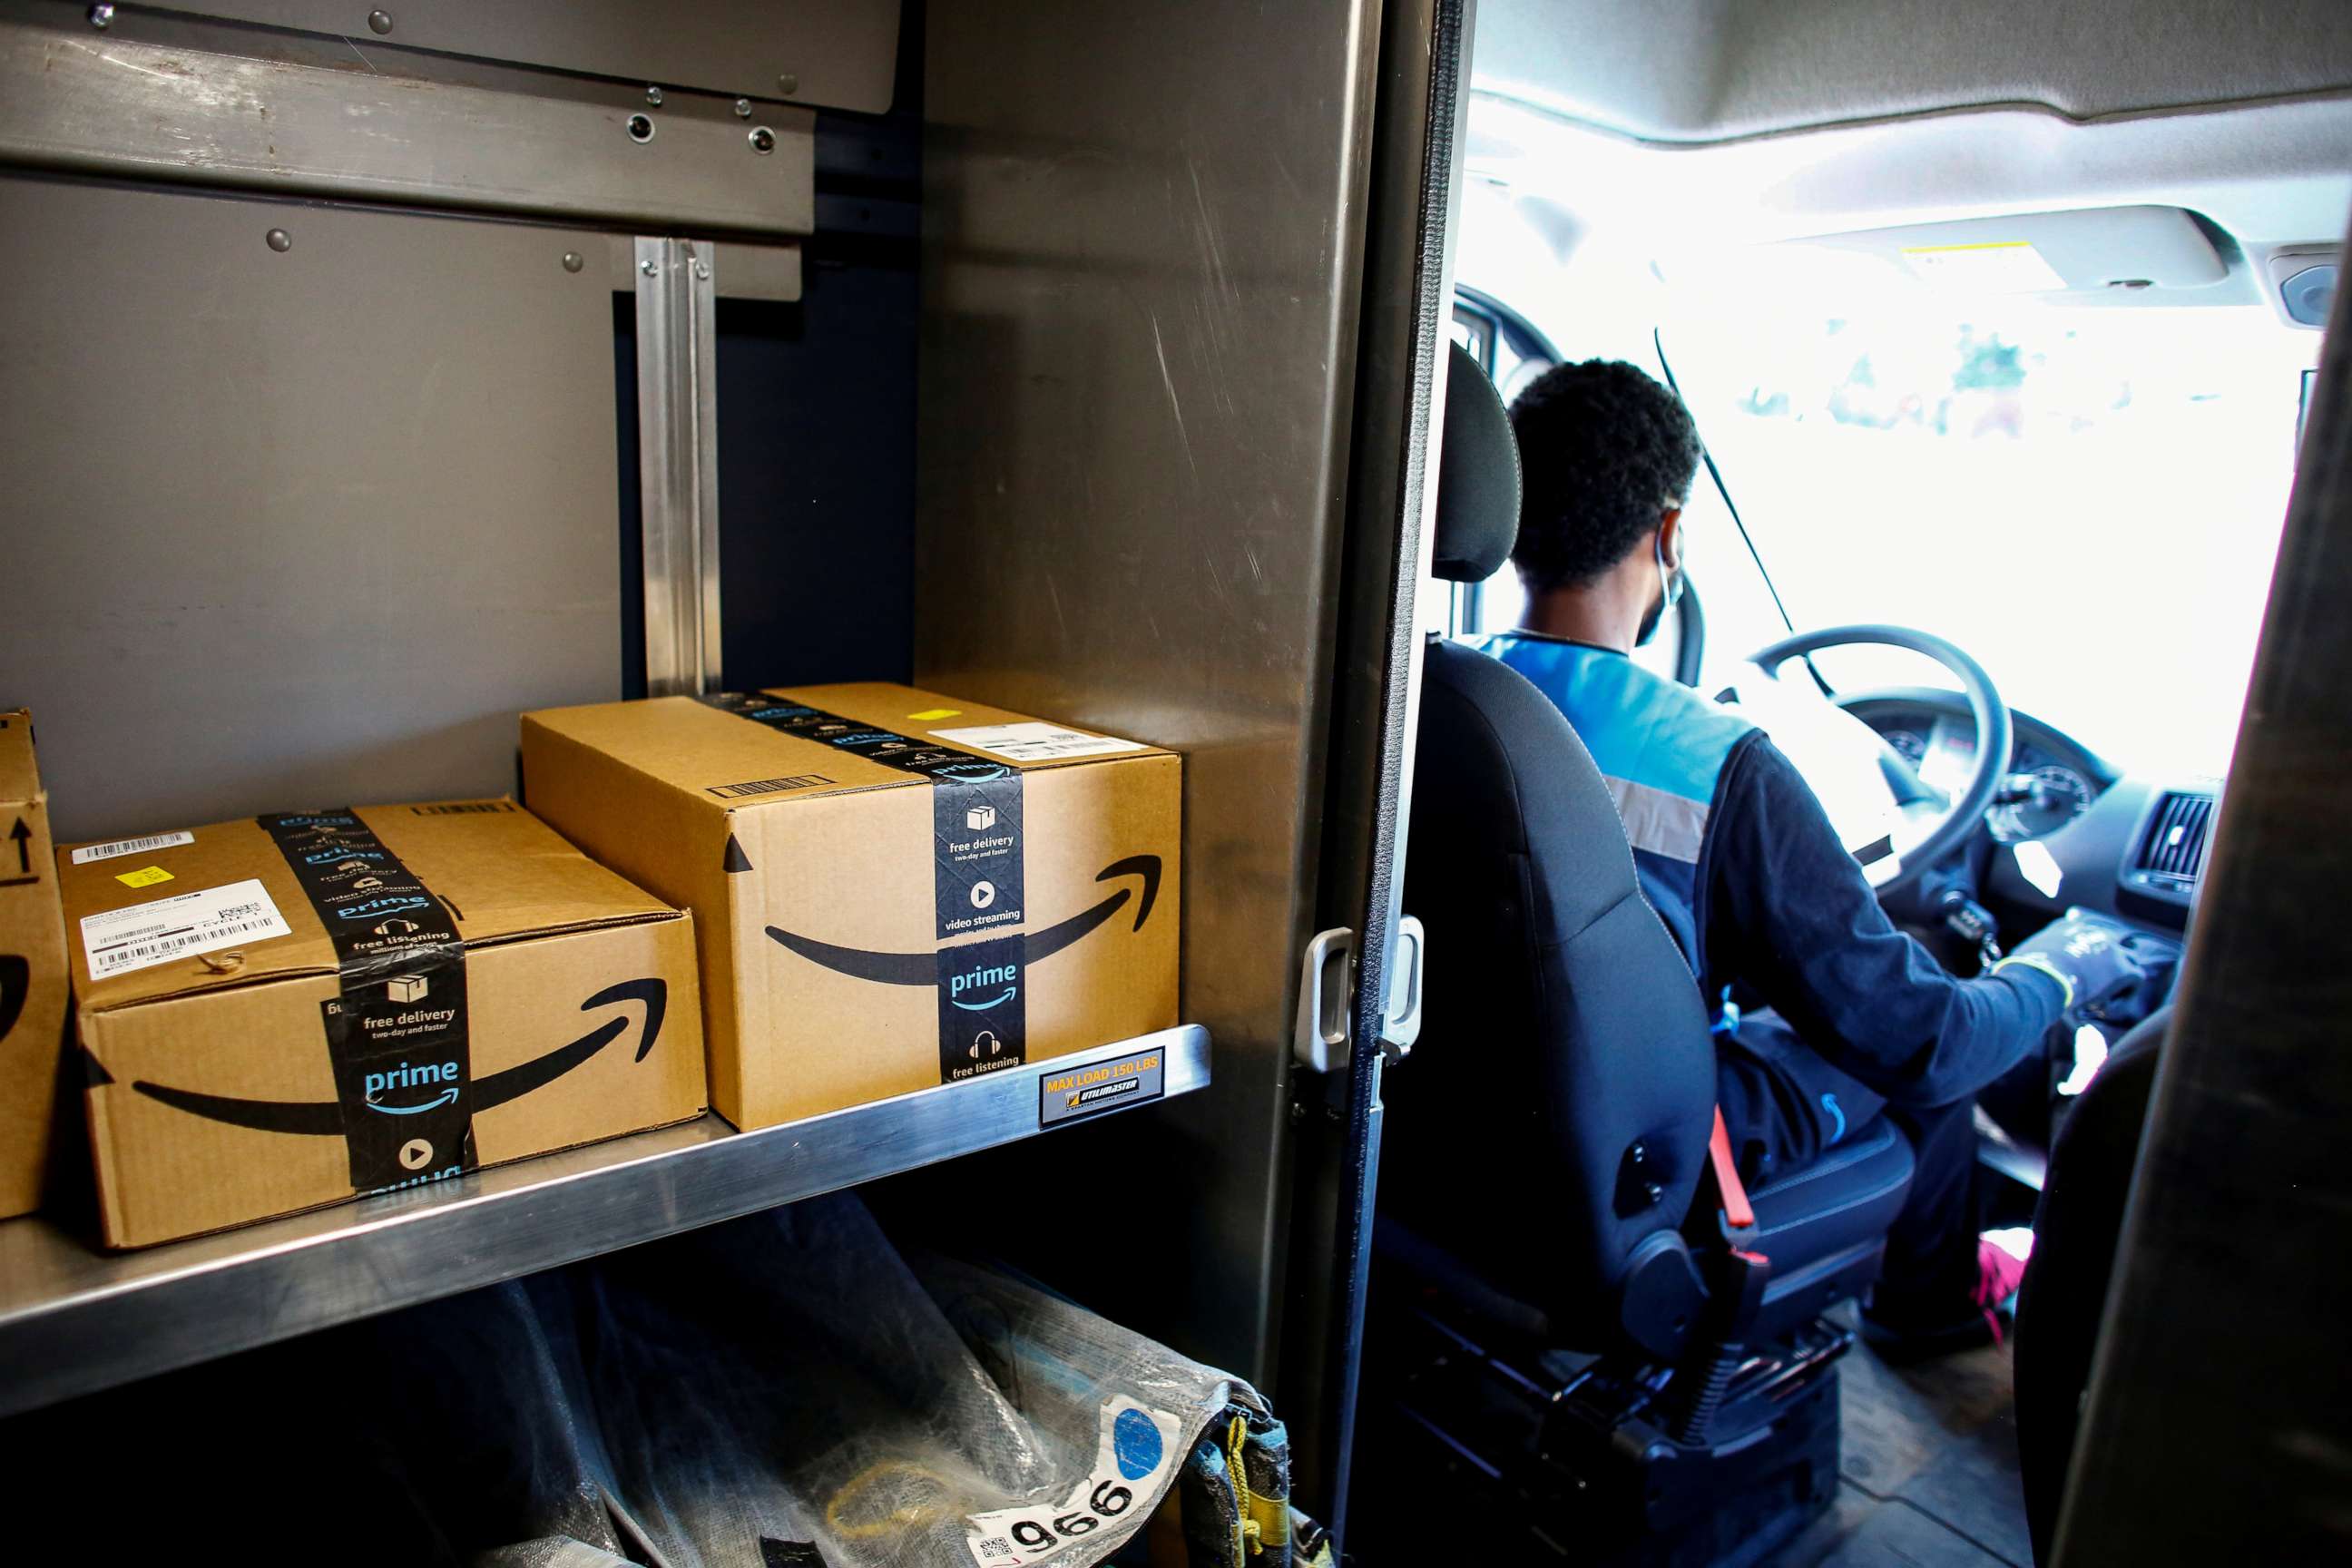 PHOTO: An Amazon worker delivers packages amid the coronavirus disease (COVID-19) outbreak in Denver, Colorado, April 22, 2020.